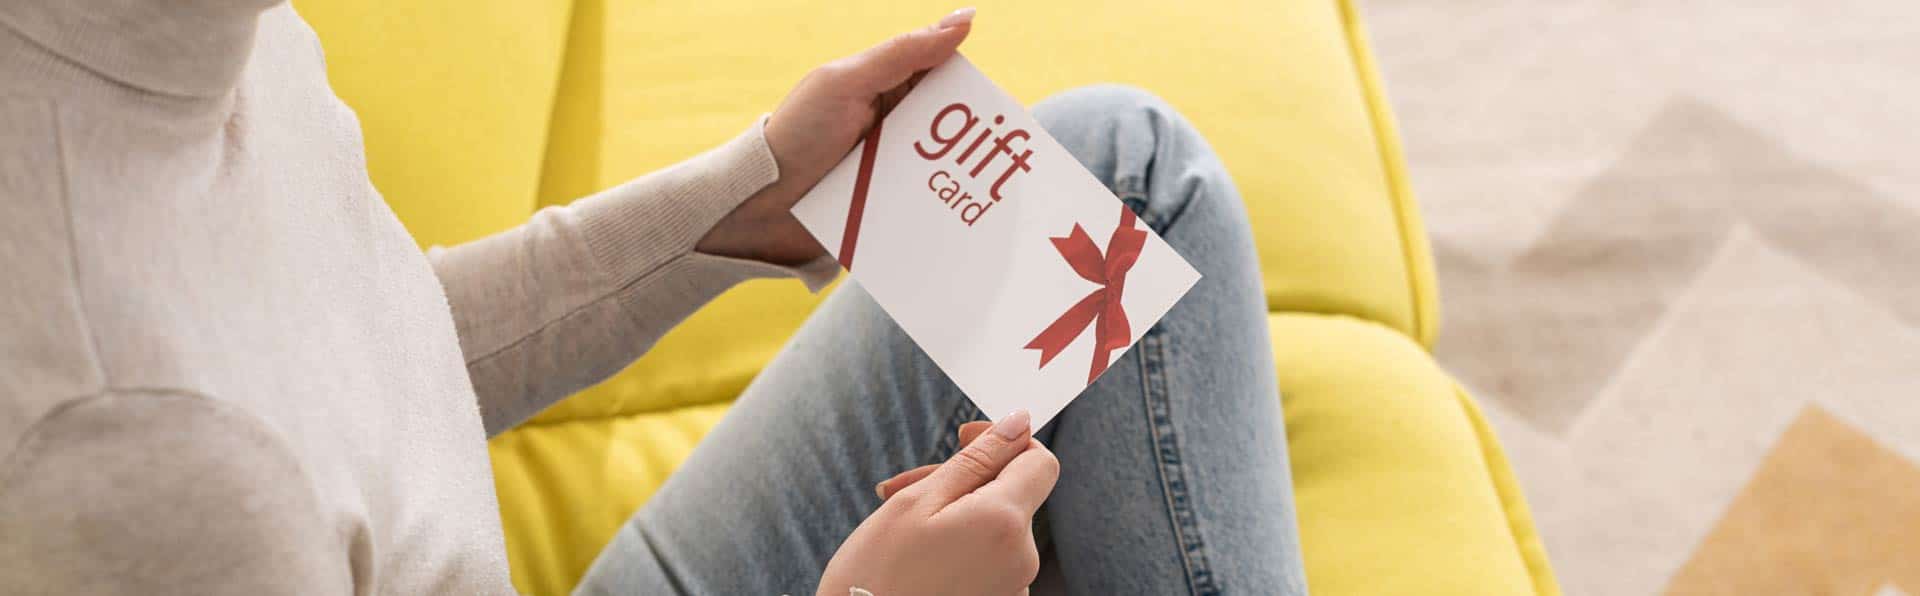 Woman in blue jeans sits on yellow couch and holds a gift card envelope